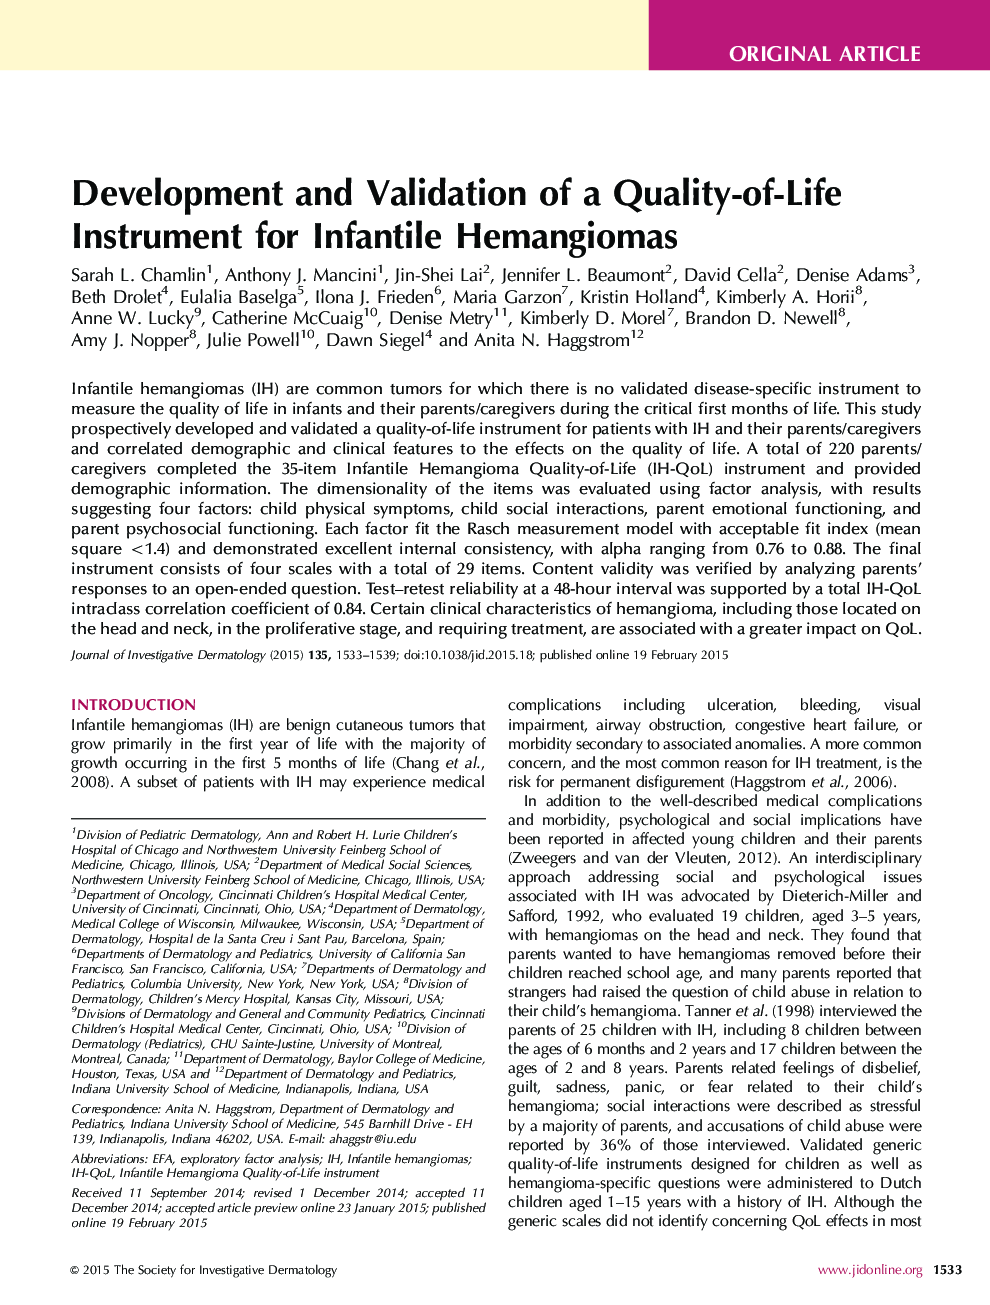 Original ArticleDevelopment and Validation of a Quality-of-Life Instrument for Infantile Hemangiomas